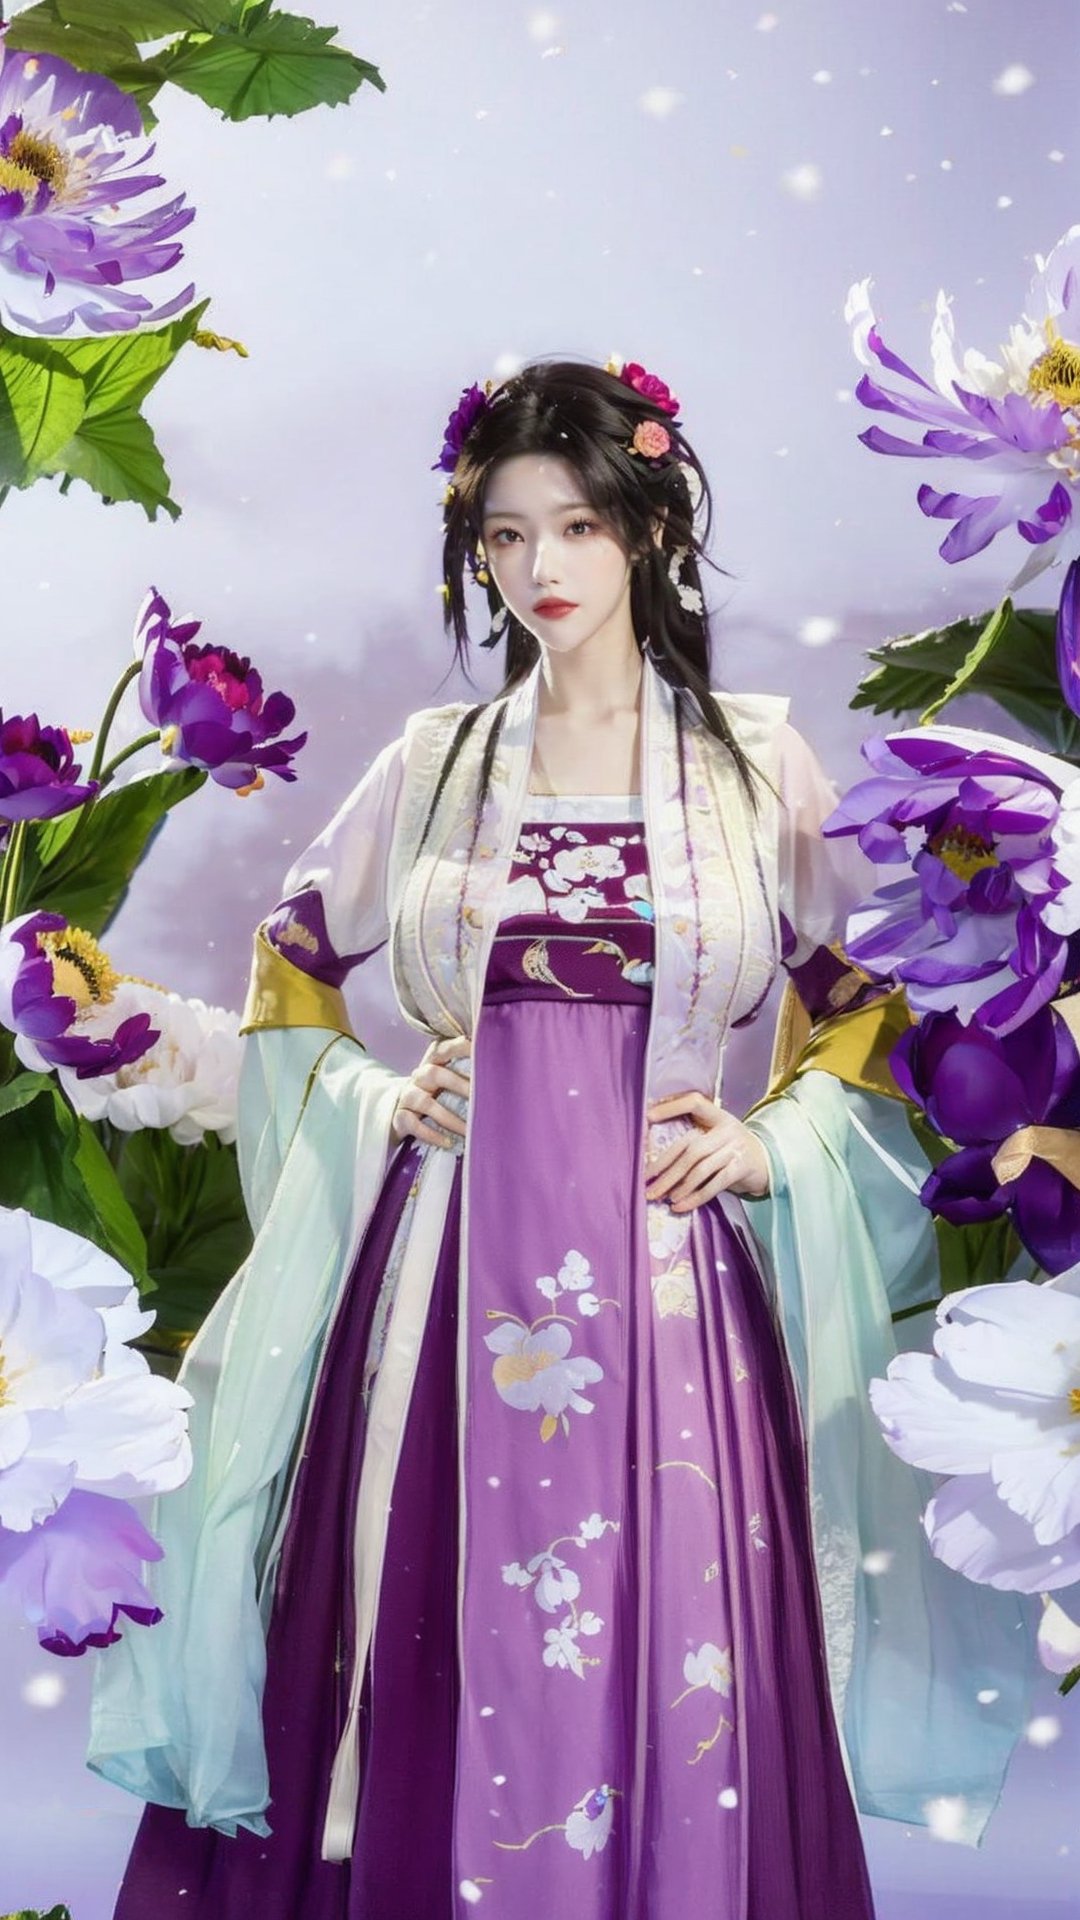 hanfu, Best Quality, masterpiece, (Snowing:1.5),1 girl, (long hair:1.2),  (big breasts:1.69),(Upper body photo:1.3),hanfu,18-year-old , exquisite , extreme face,creamy skin, fair skin,realistic skin details, (super-detail) , long hair, (big breasts:1.59),1girl,long skirt,long sleeves,(Peony flowers, plum blossoms:1.5),(flower:1.3,tangdynastyhanfu, hanfu2,myhanfu, chang,Sit on the steps, hands on hips